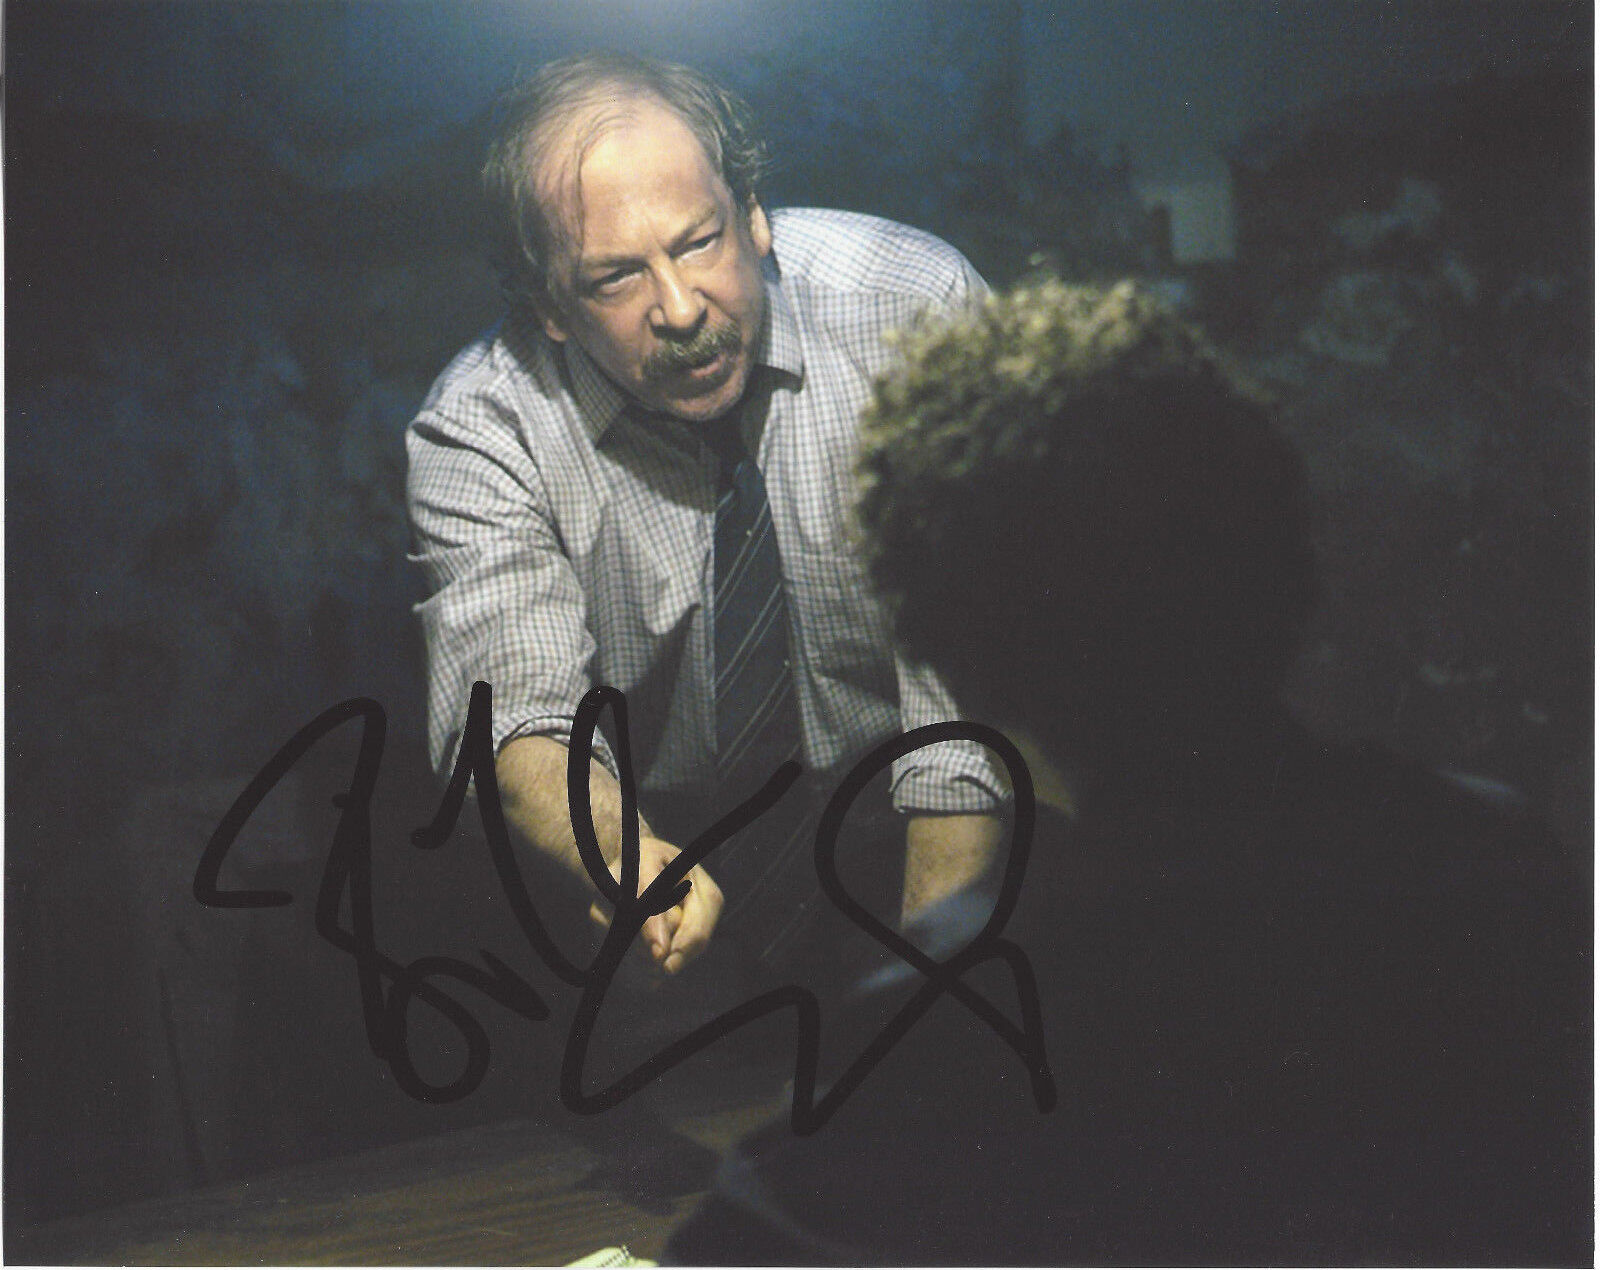 ACTOR BILL CAMP SIGNED 'THE NIGHT OF' 8X10 Photo Poster painting E w/COA LOOMING TOWER PROOF